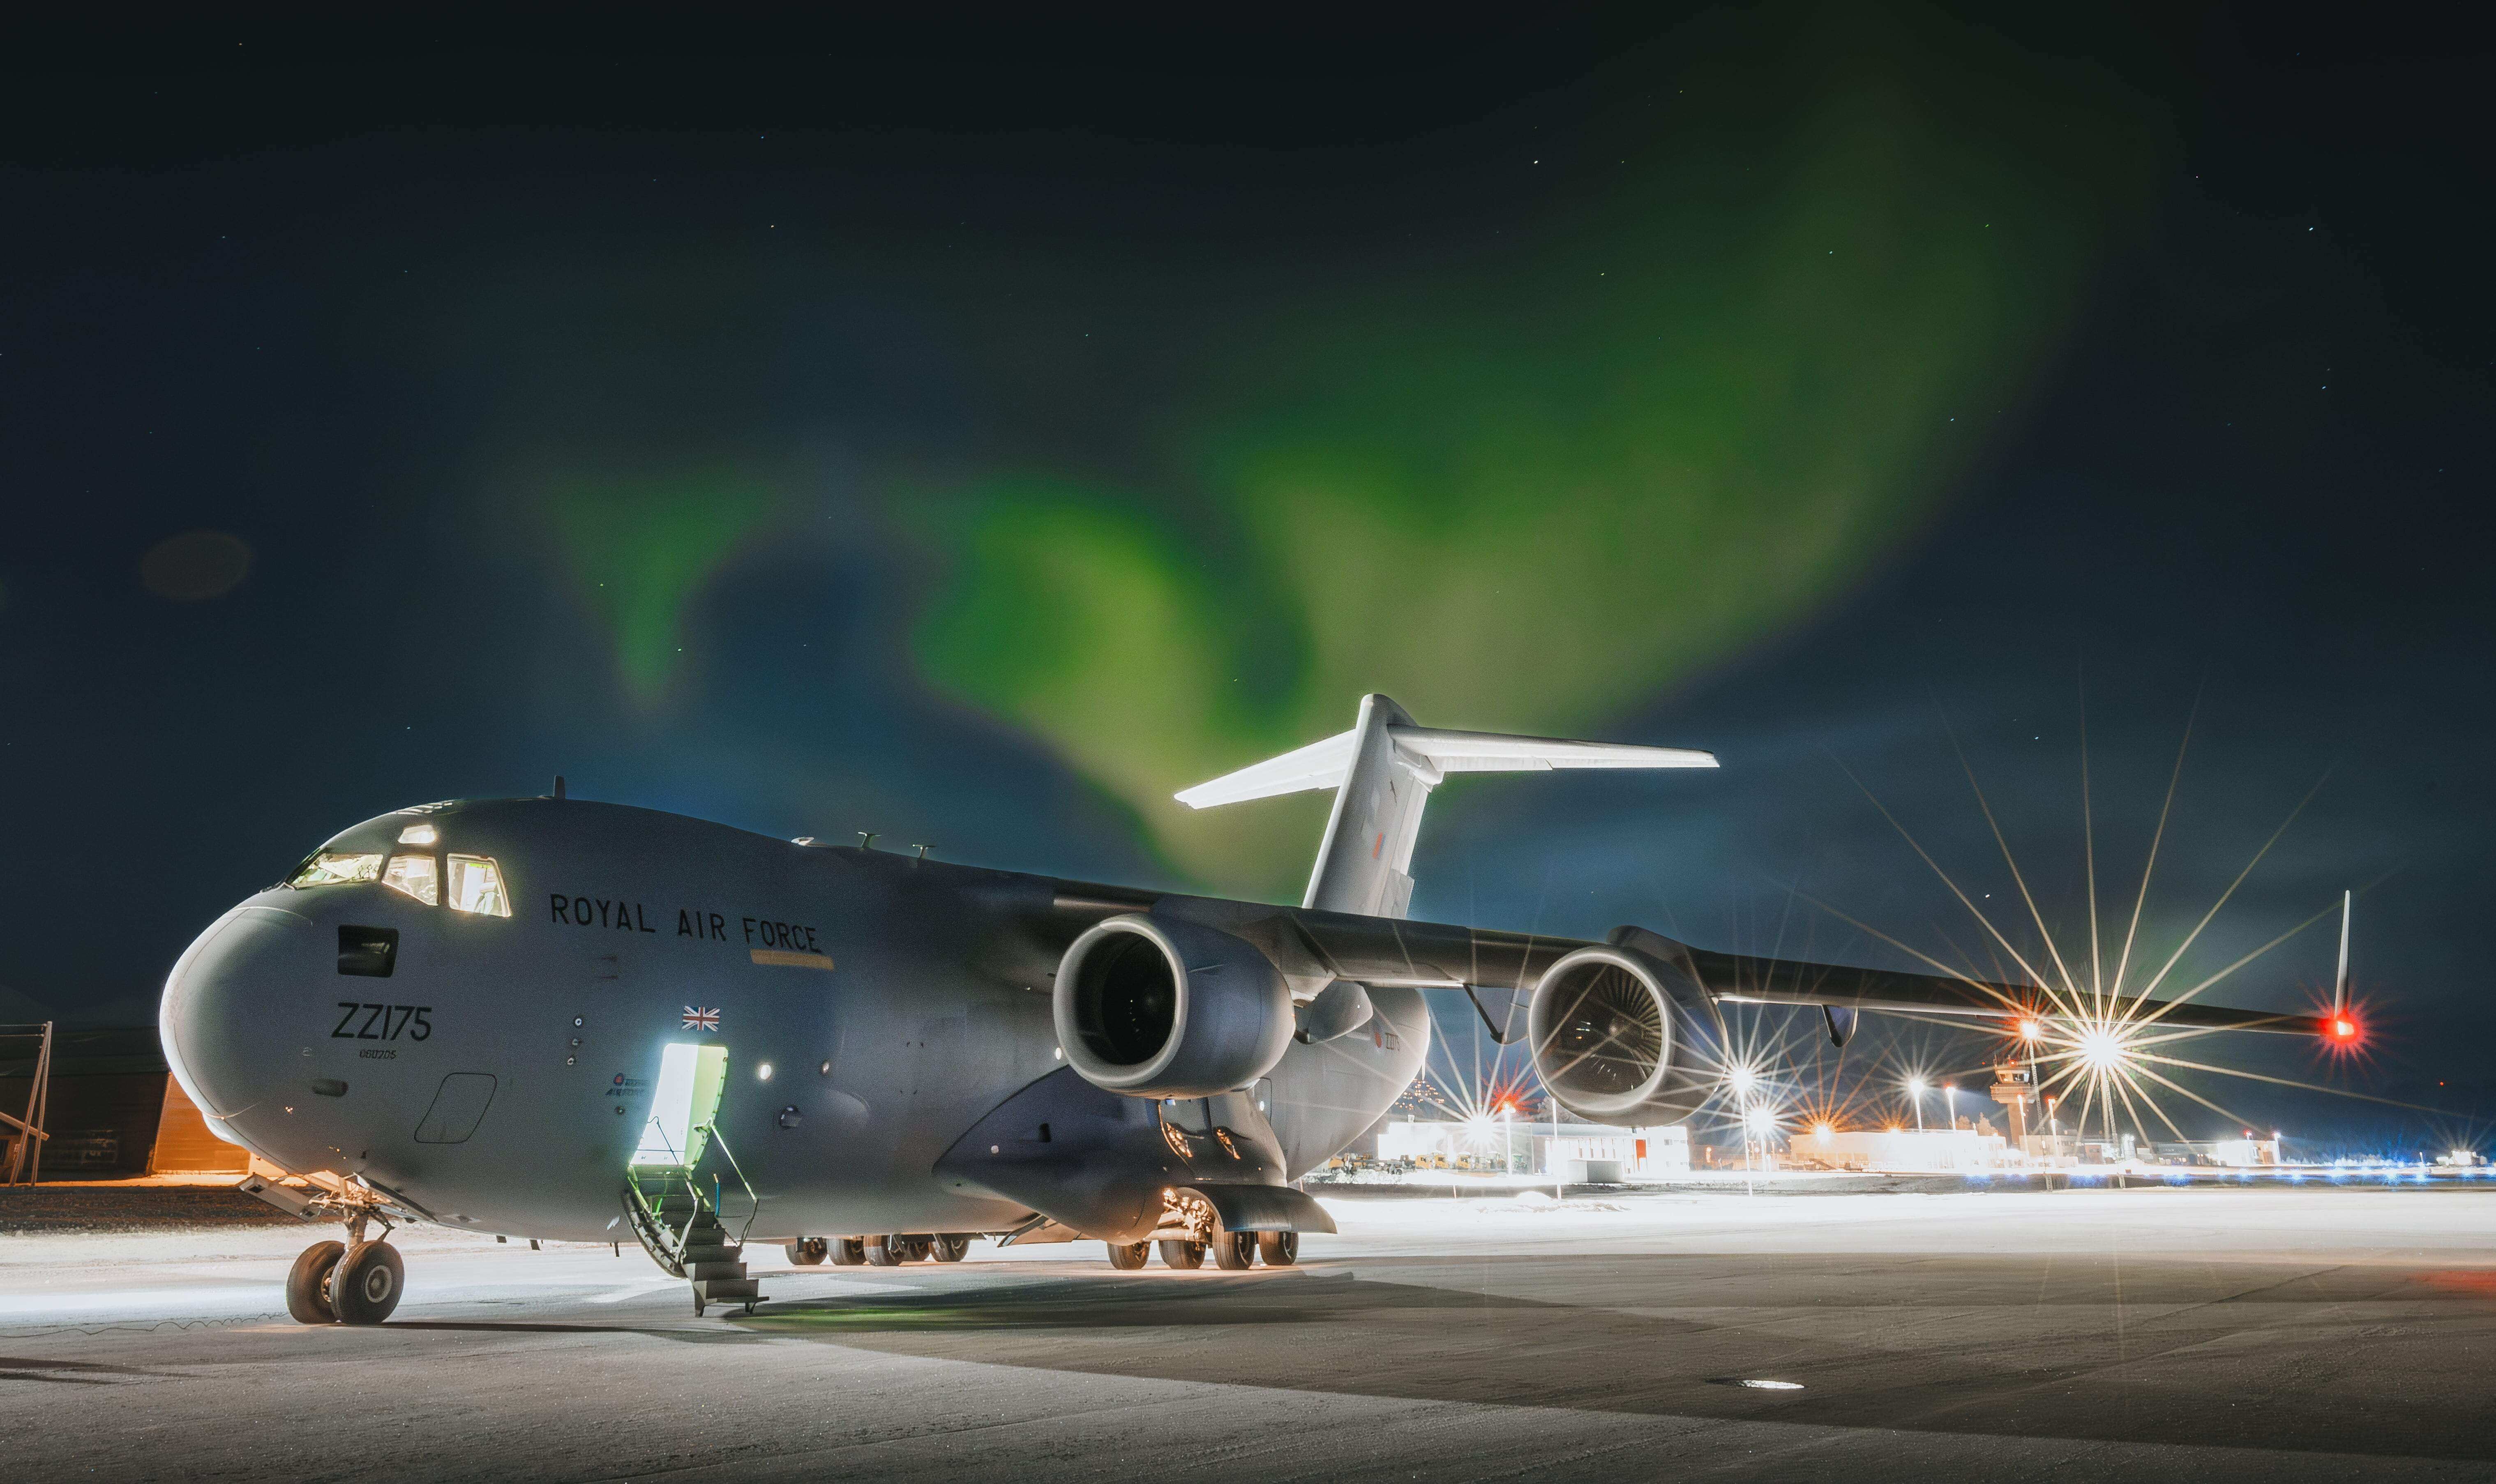 C-17 aircraft on runway at night with backdrop of the Northern Lights